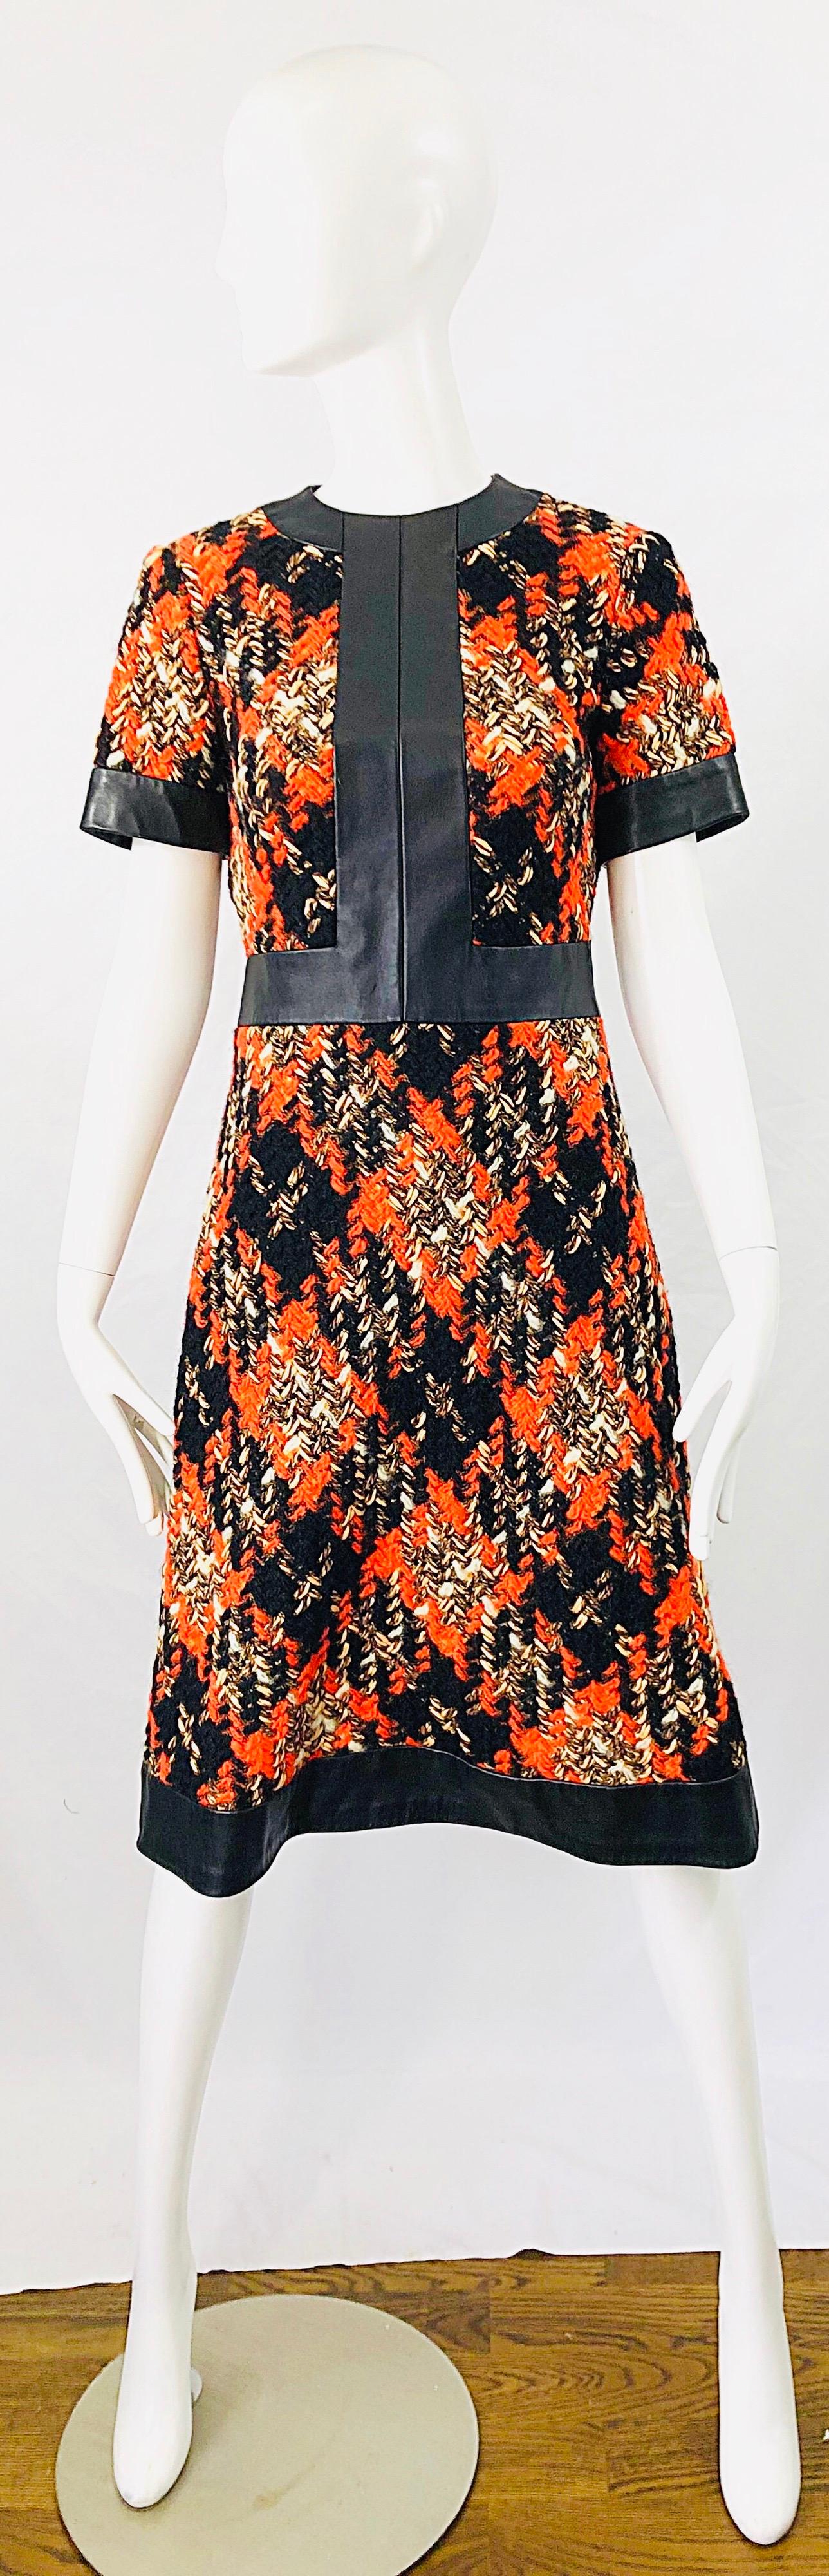 Beautiful vintage 60s LOUIS FERAUD Haute Couture boucle and leather A Line dress ! Features a soft boucle fabric in warm hues or orange, brown, black, tan and ivory throughout. Black leather accents down the front center bodice, around the collar,